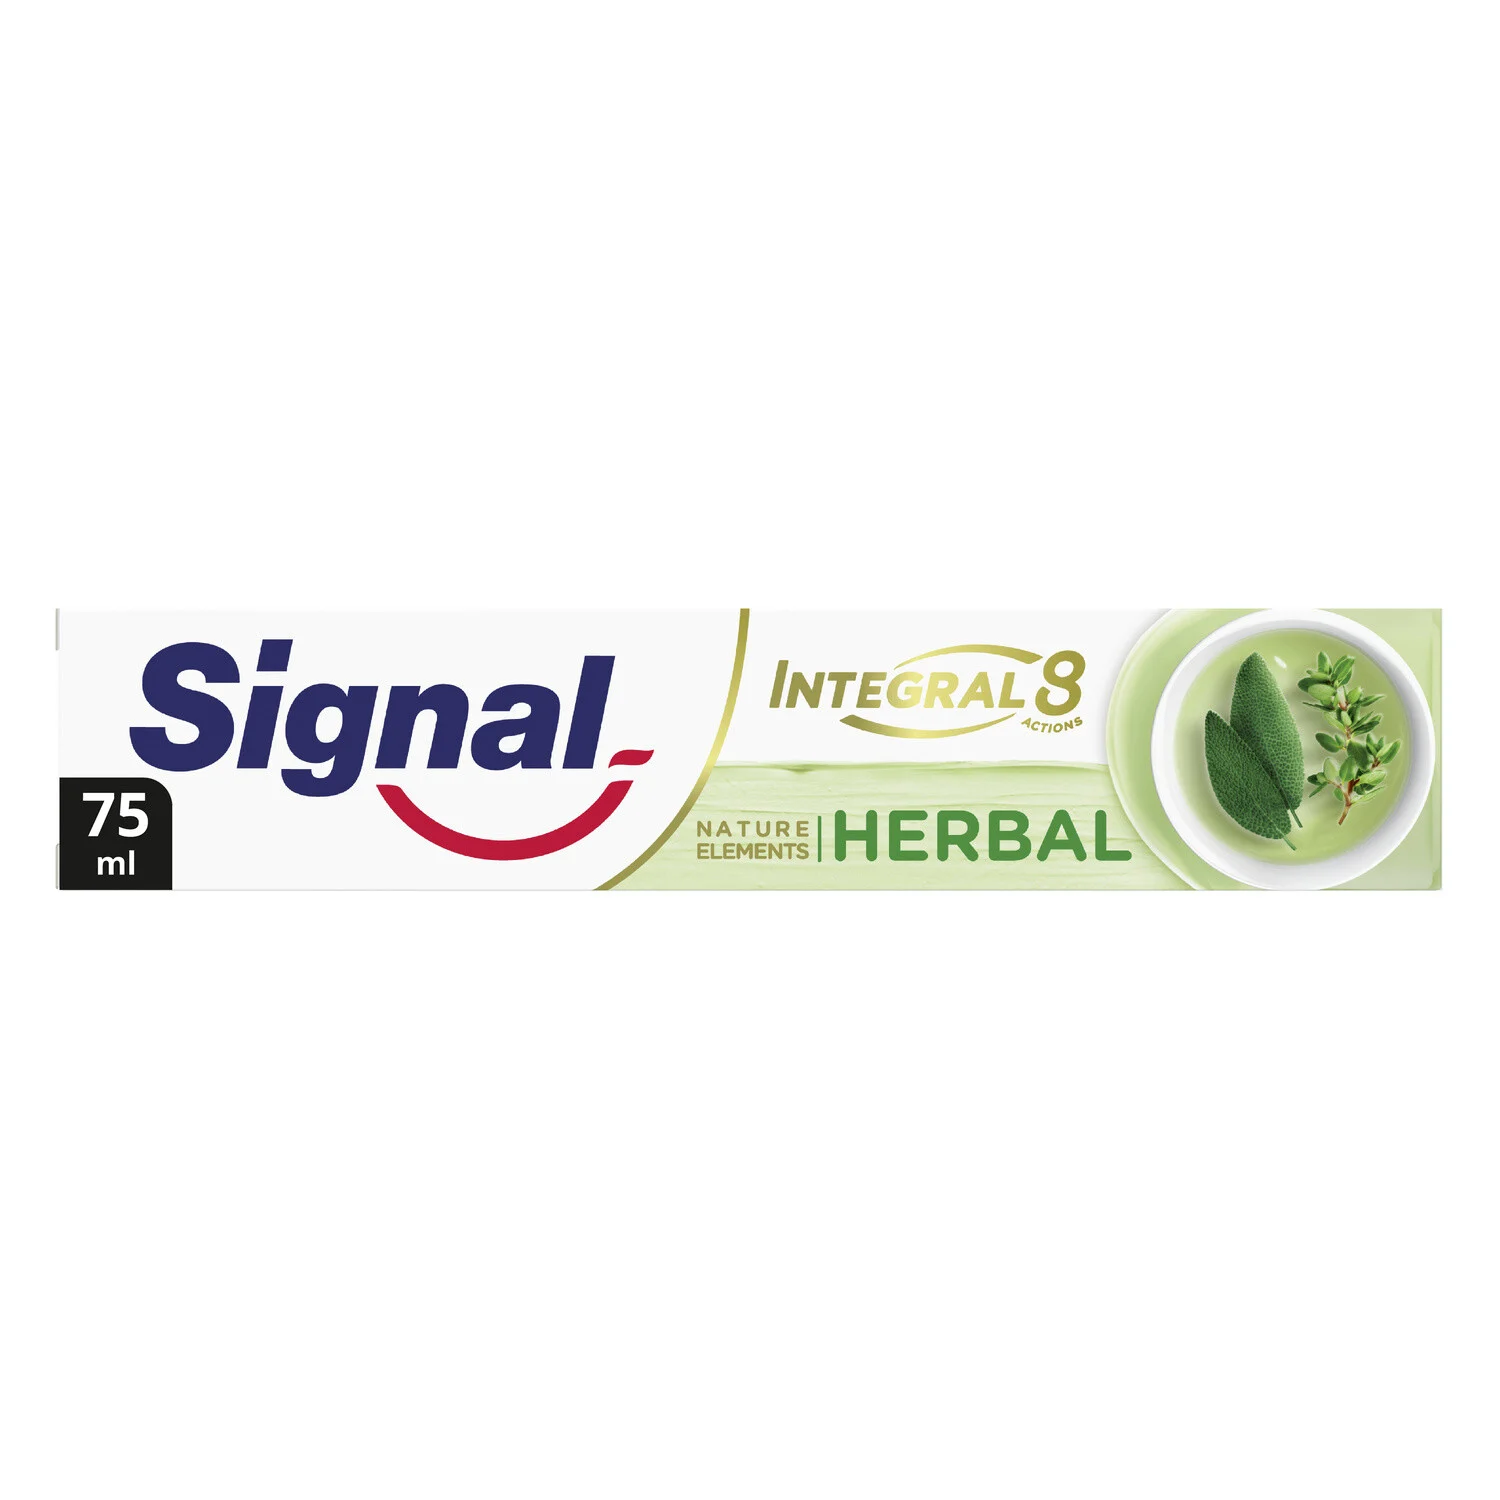 Dentrifrice Integral 8 Nature Elements Herbal 75ml -signal